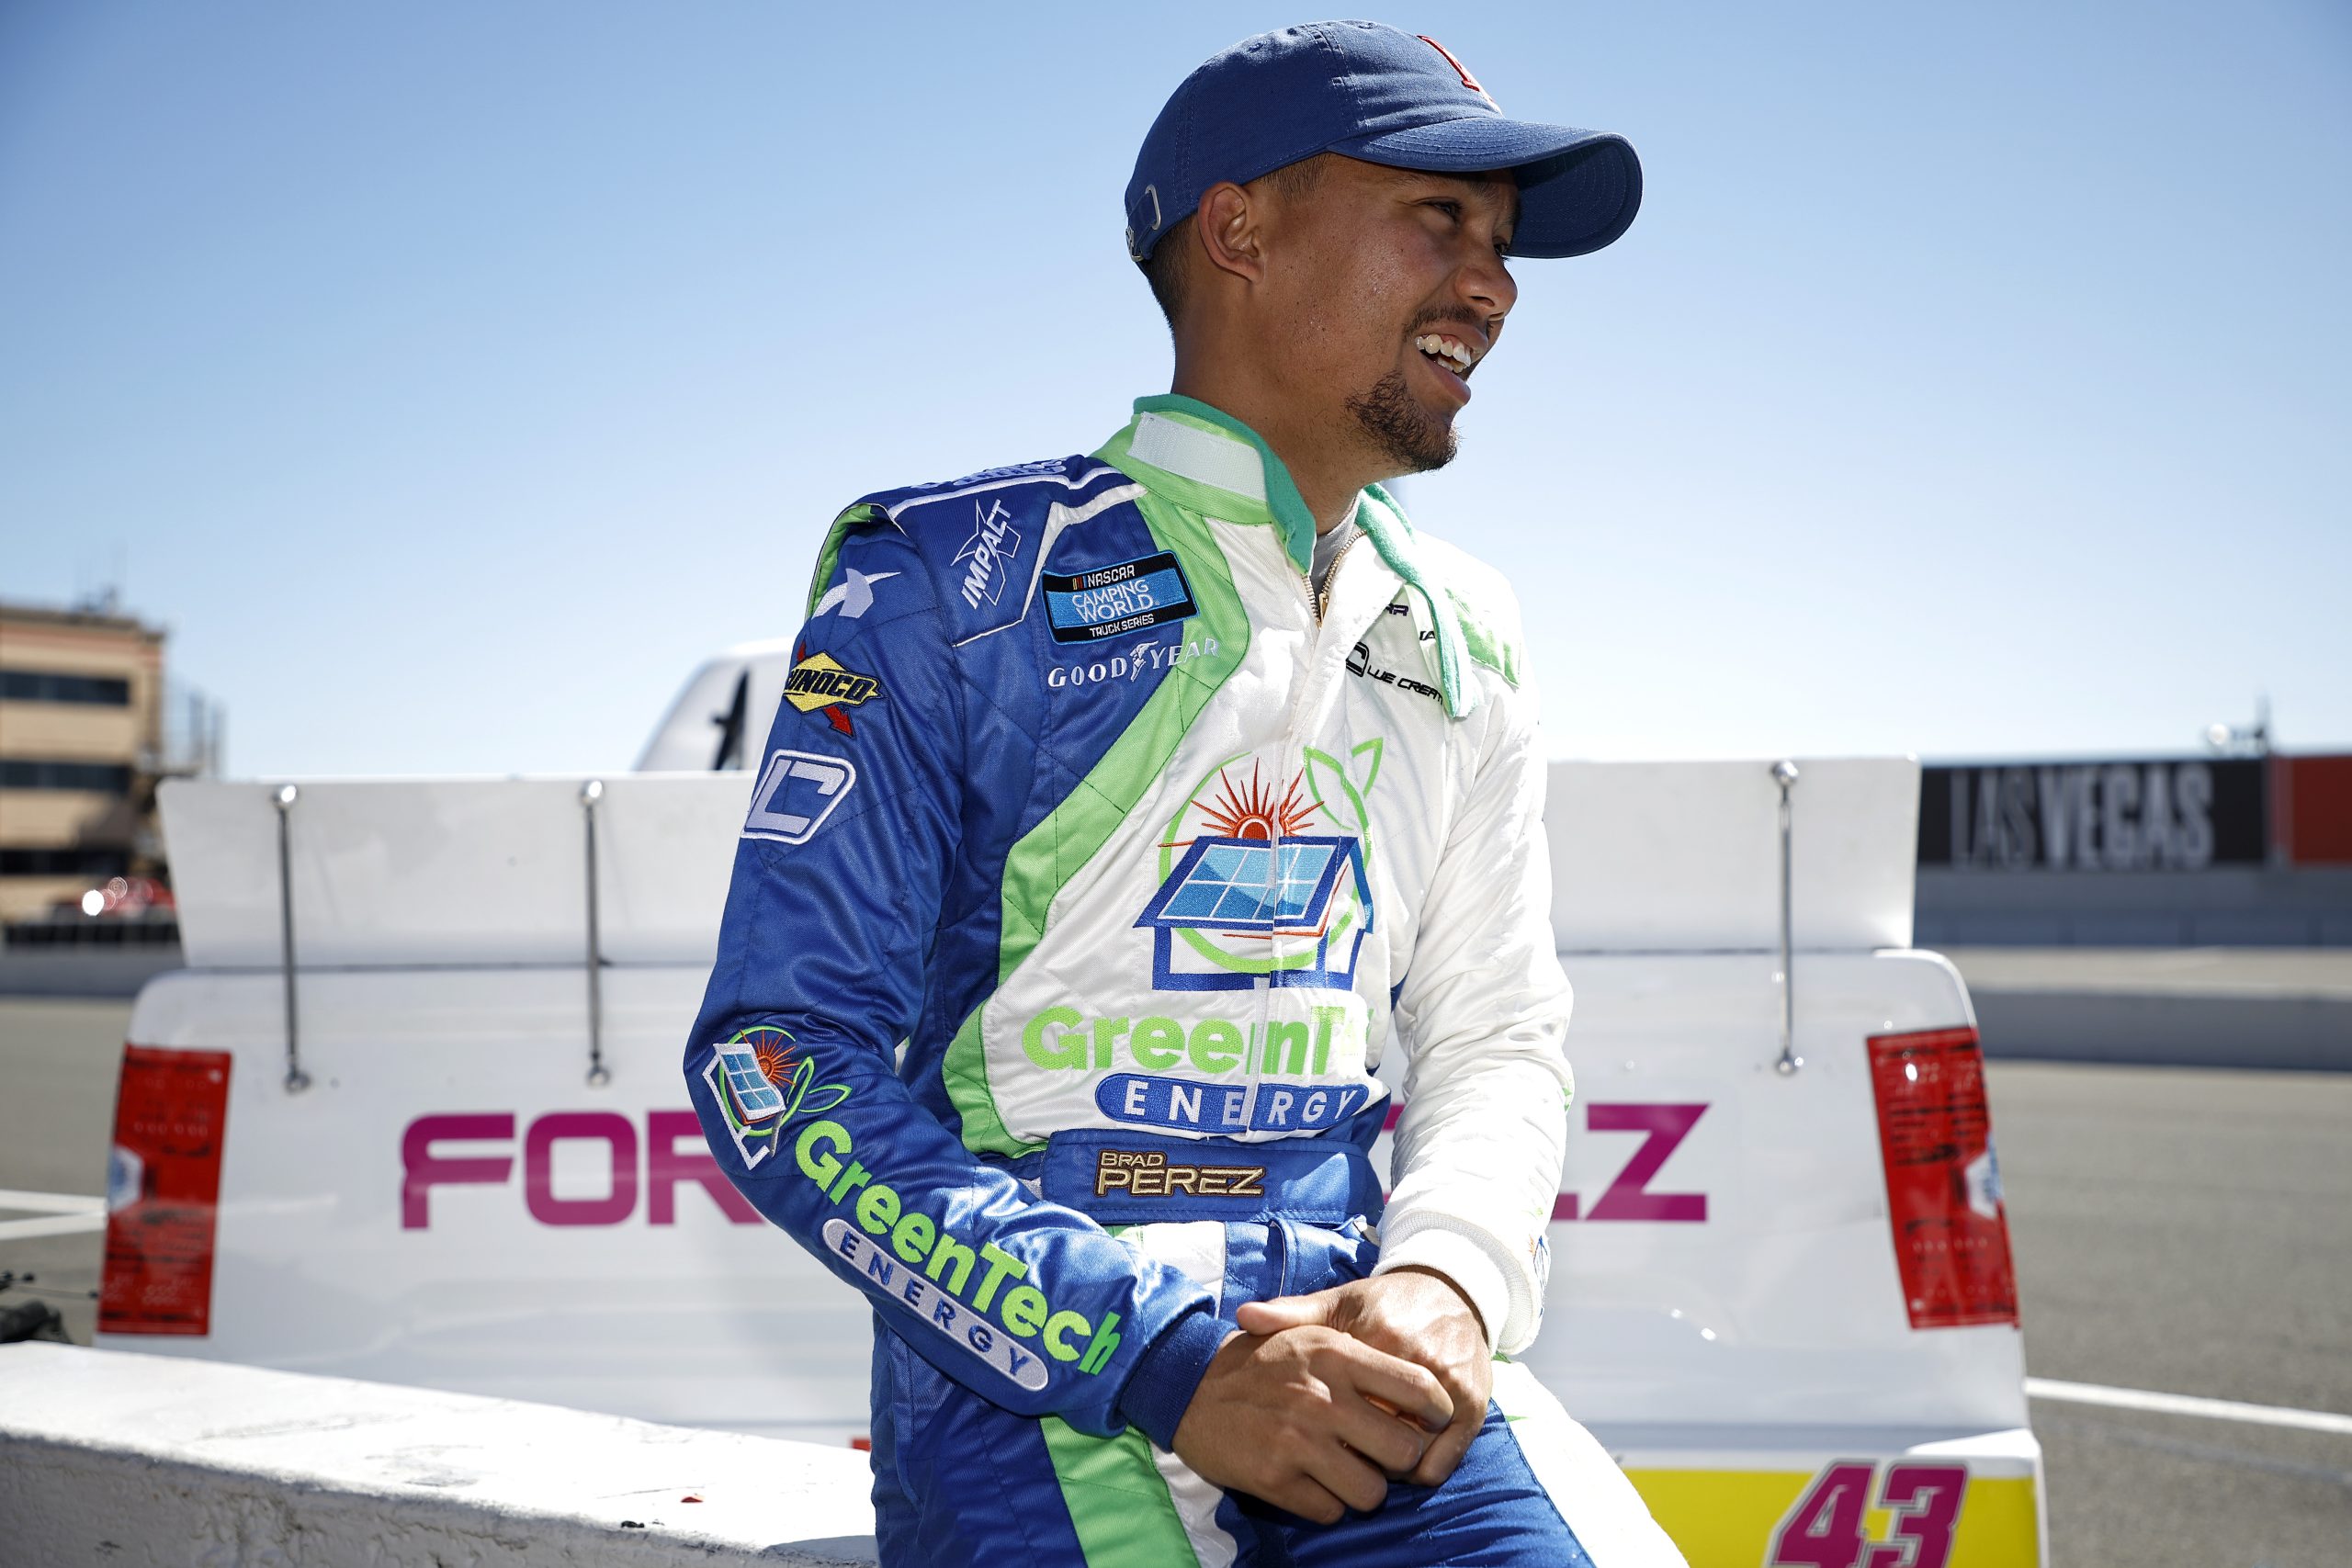 SONOMA, CALIFORNIA - JUNE 11: Brad Perez, driver of the #43 I Set My Friends on Fire Toyota, waits on the grid during qualifying for the NASCAR Camping World Truck Series DoorDash 250 at Sonoma Raceway on June 11, 2022 in Sonoma, California. (Photo by Chris Graythen/Getty Images)